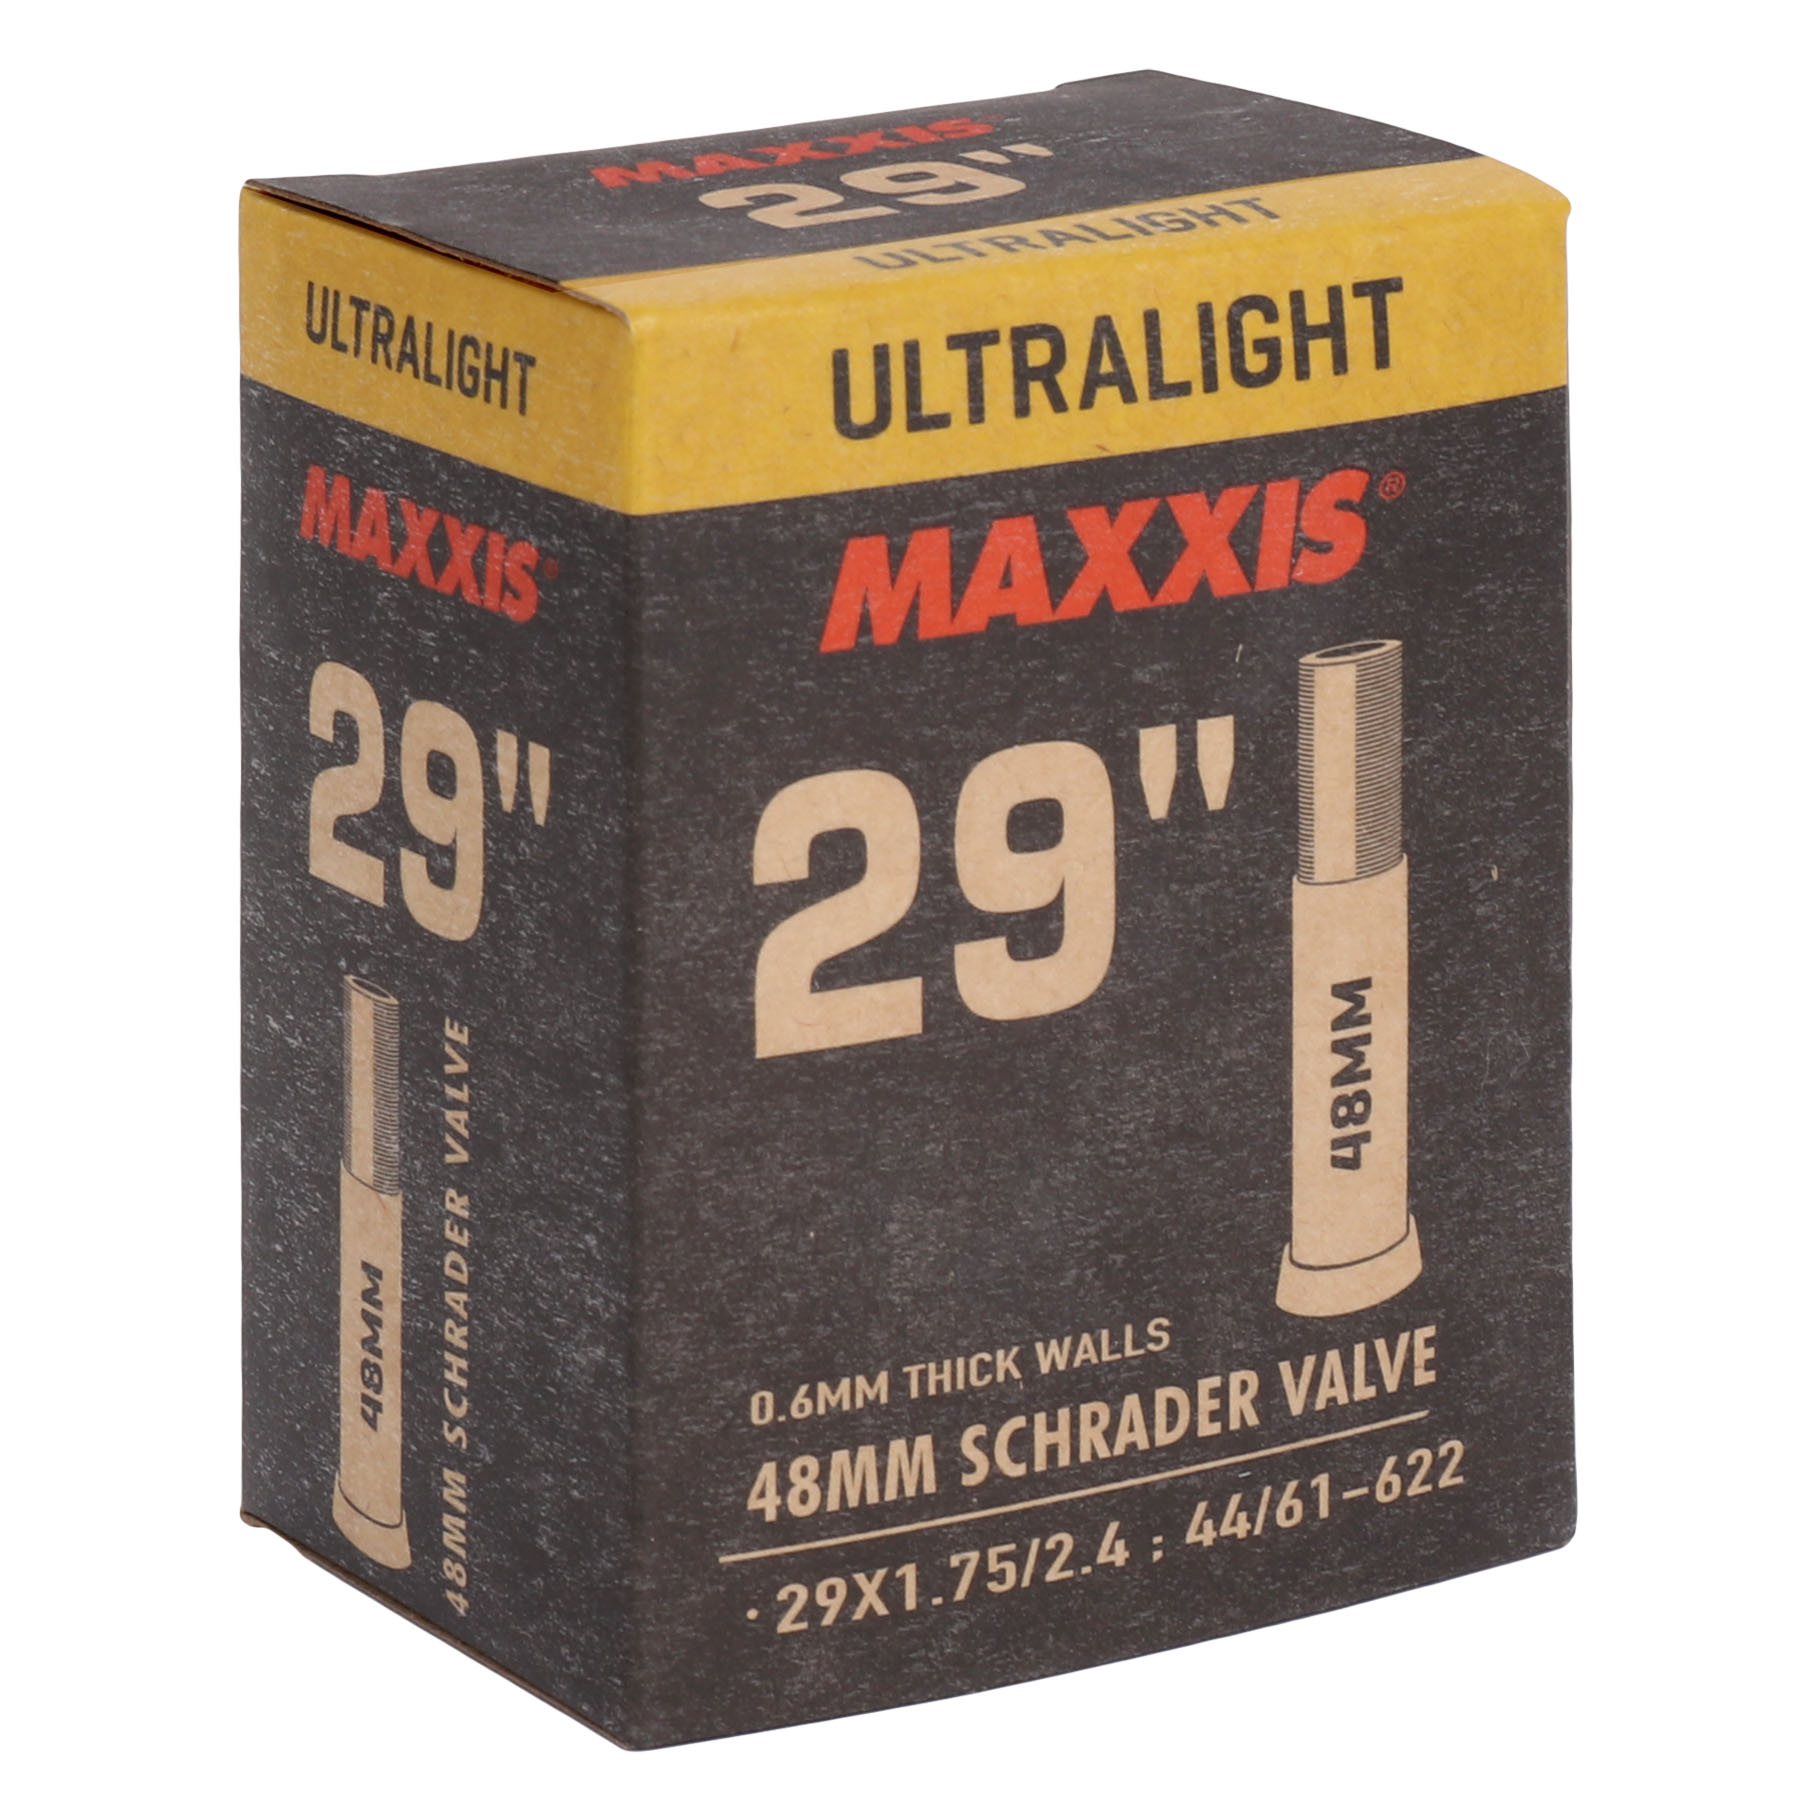 Picture of Maxxis UltraLight MTB Tube - 29x1.75-2.40 inches - Schrader - 48mm